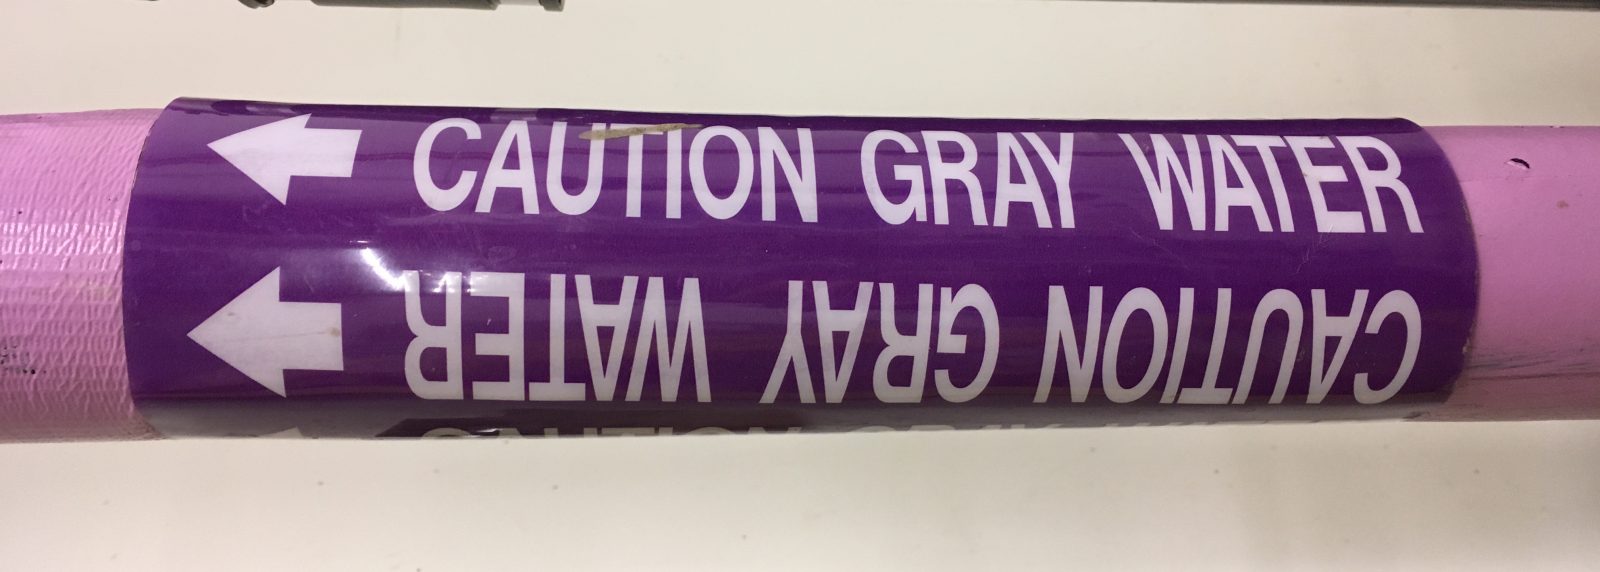 Close-up of a purpler "caution grey water" pipe.